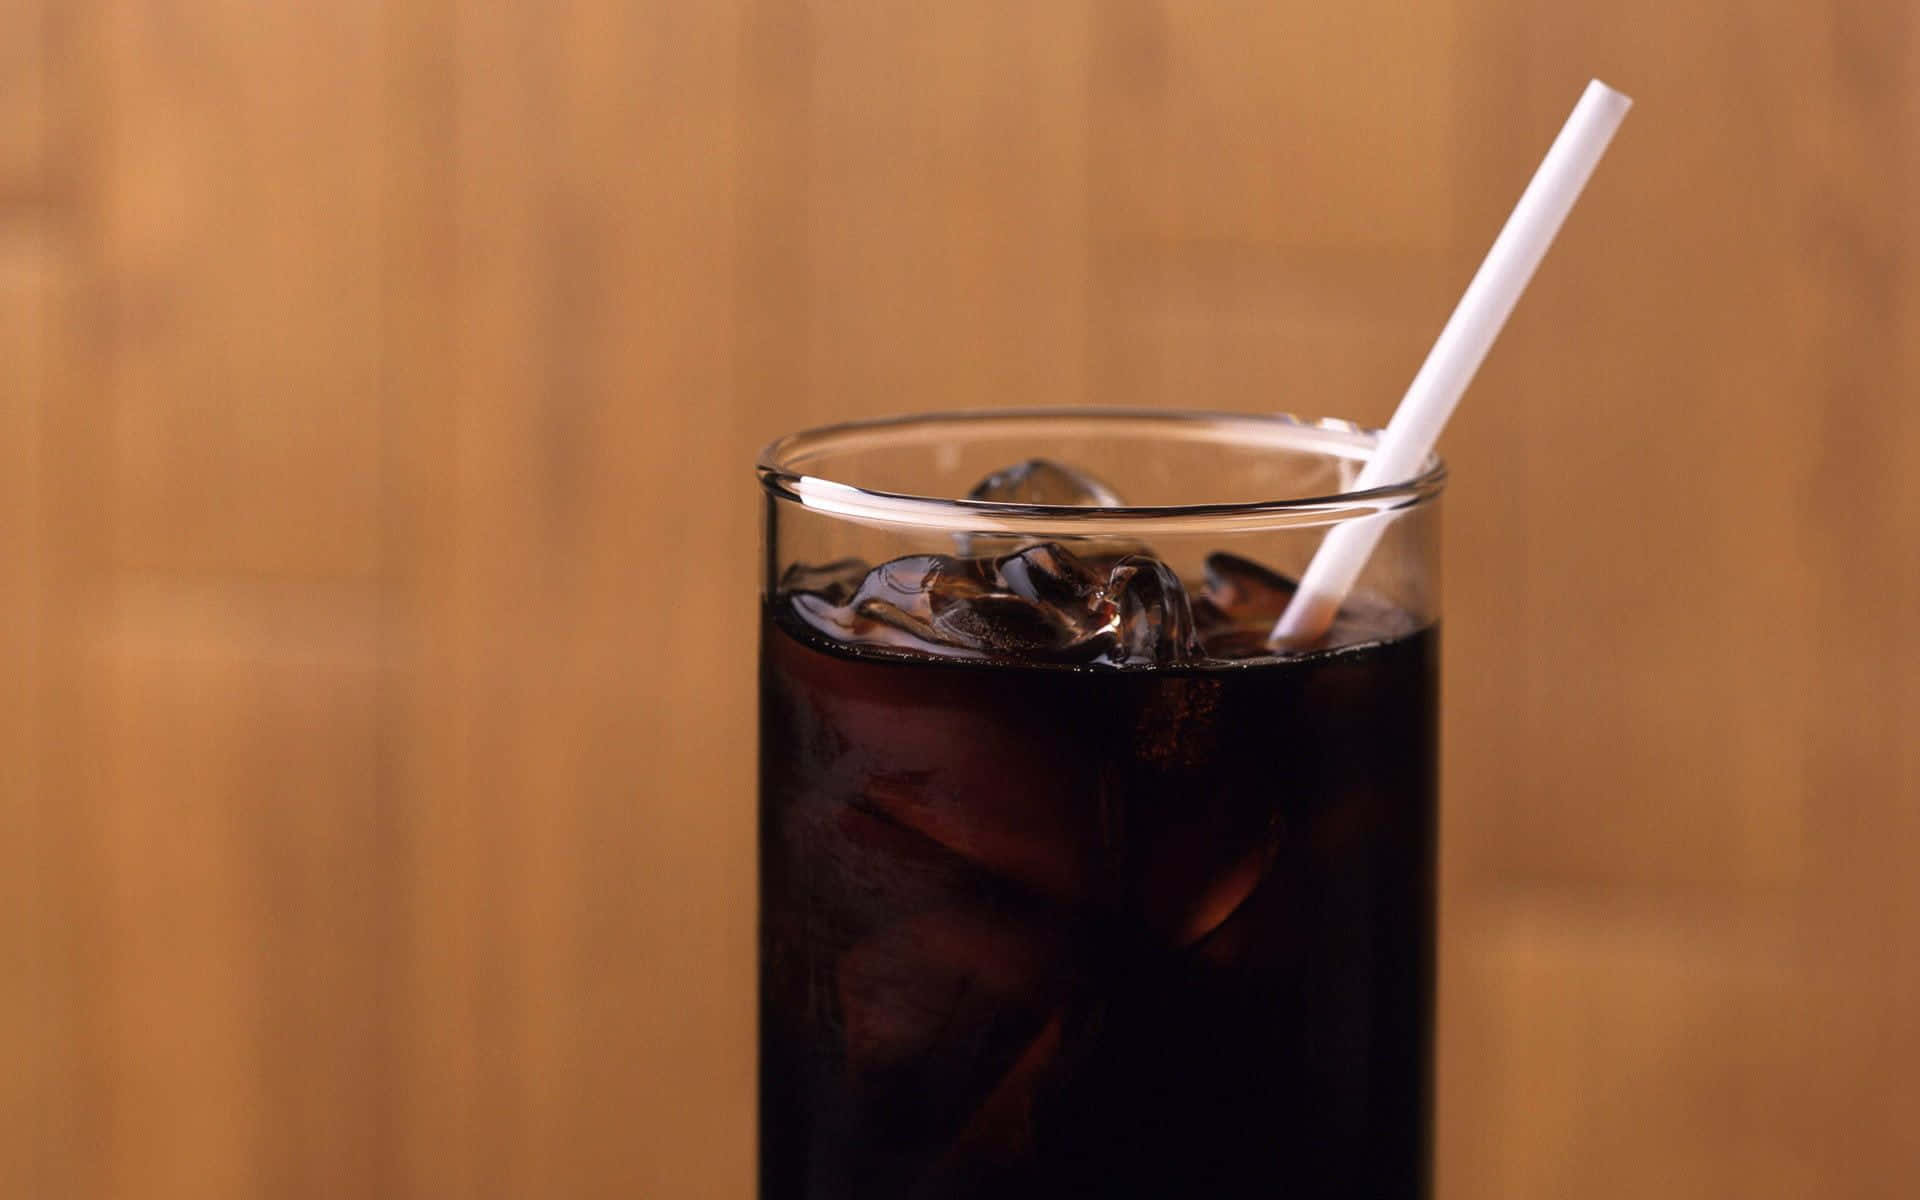 Switch up your usual coffee routine and try a delicious iced coffee!